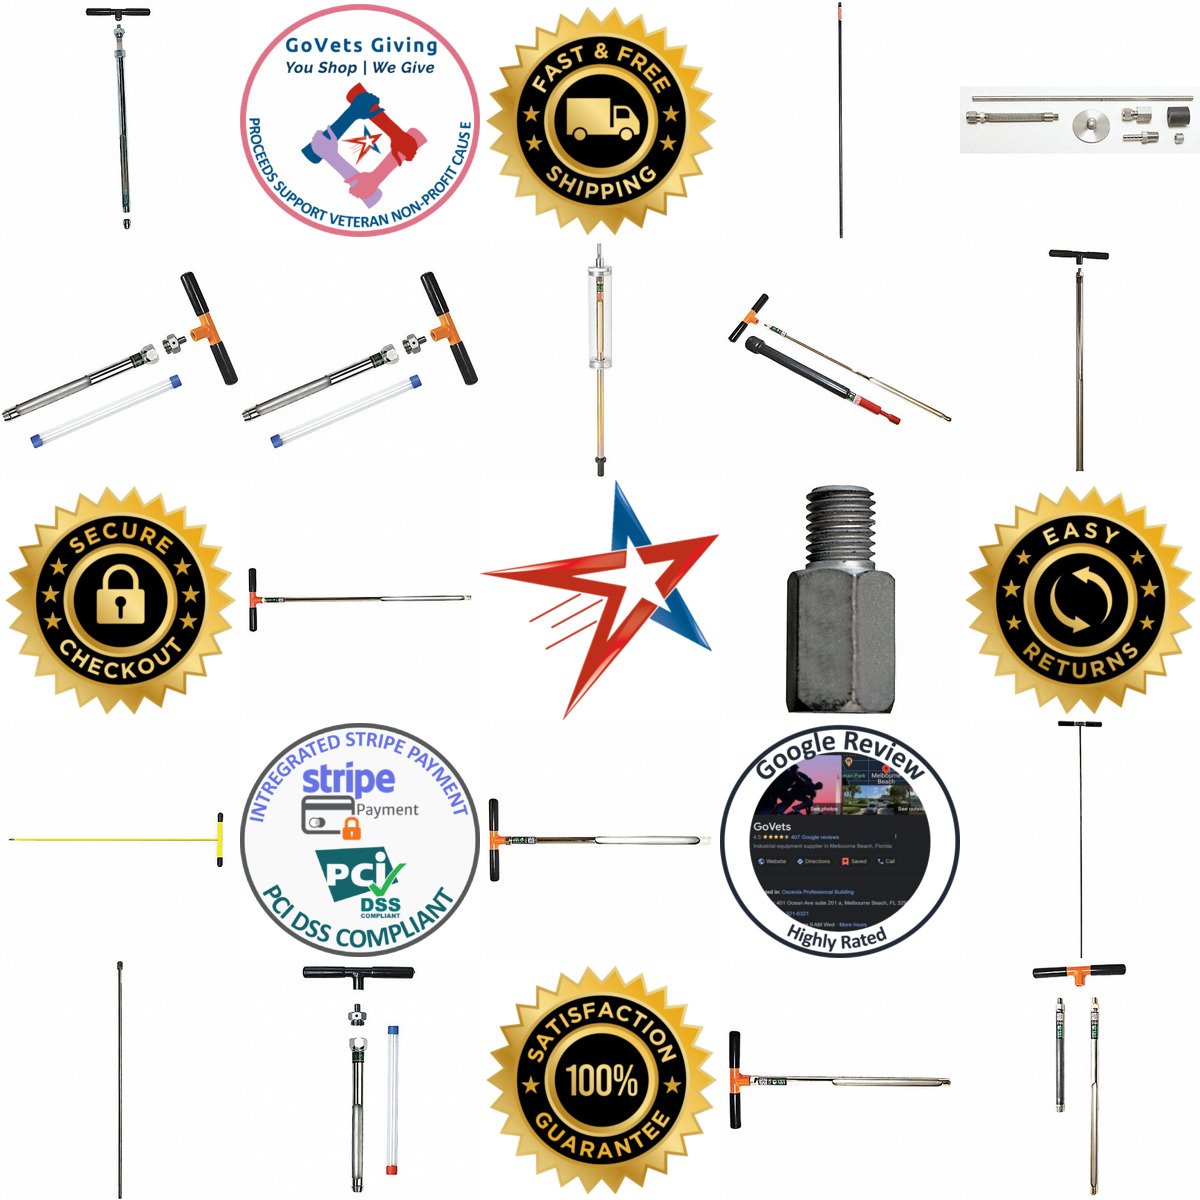 A selection of Soil Testing Probes products on GoVets